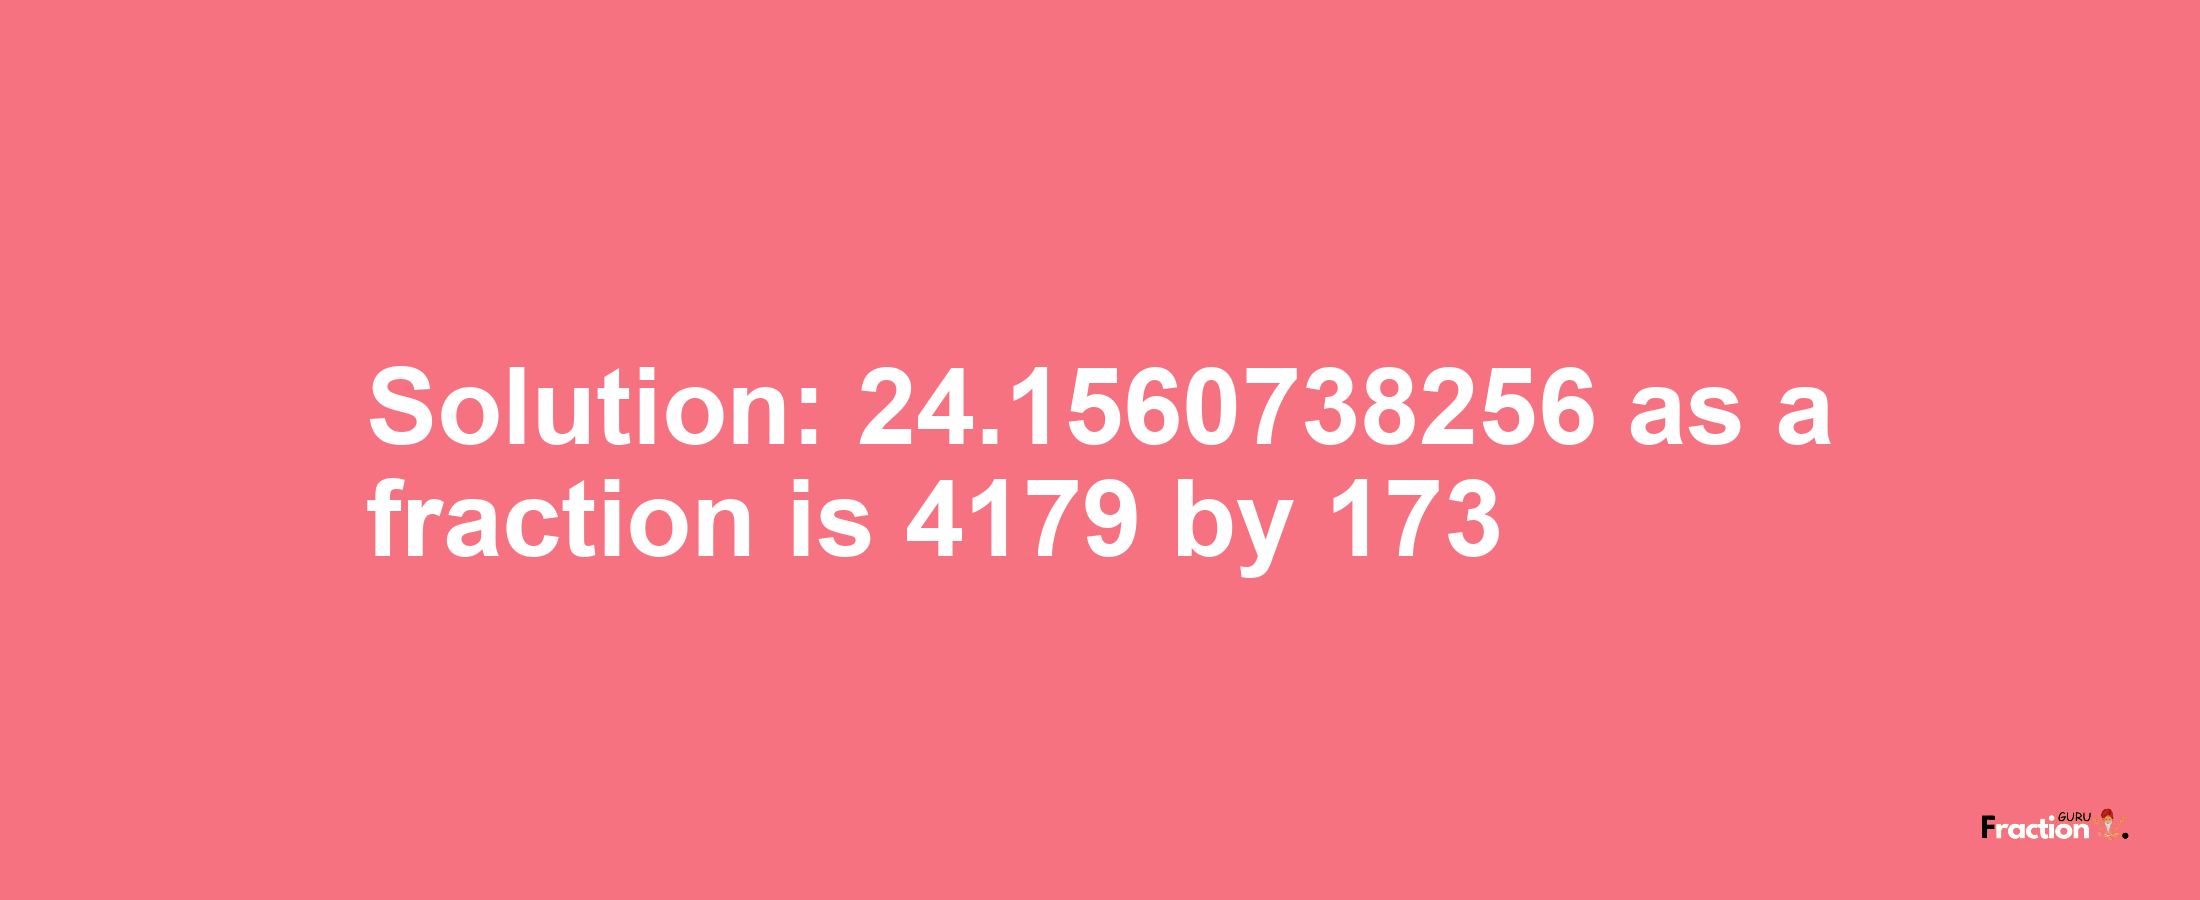 Solution:24.1560738256 as a fraction is 4179/173